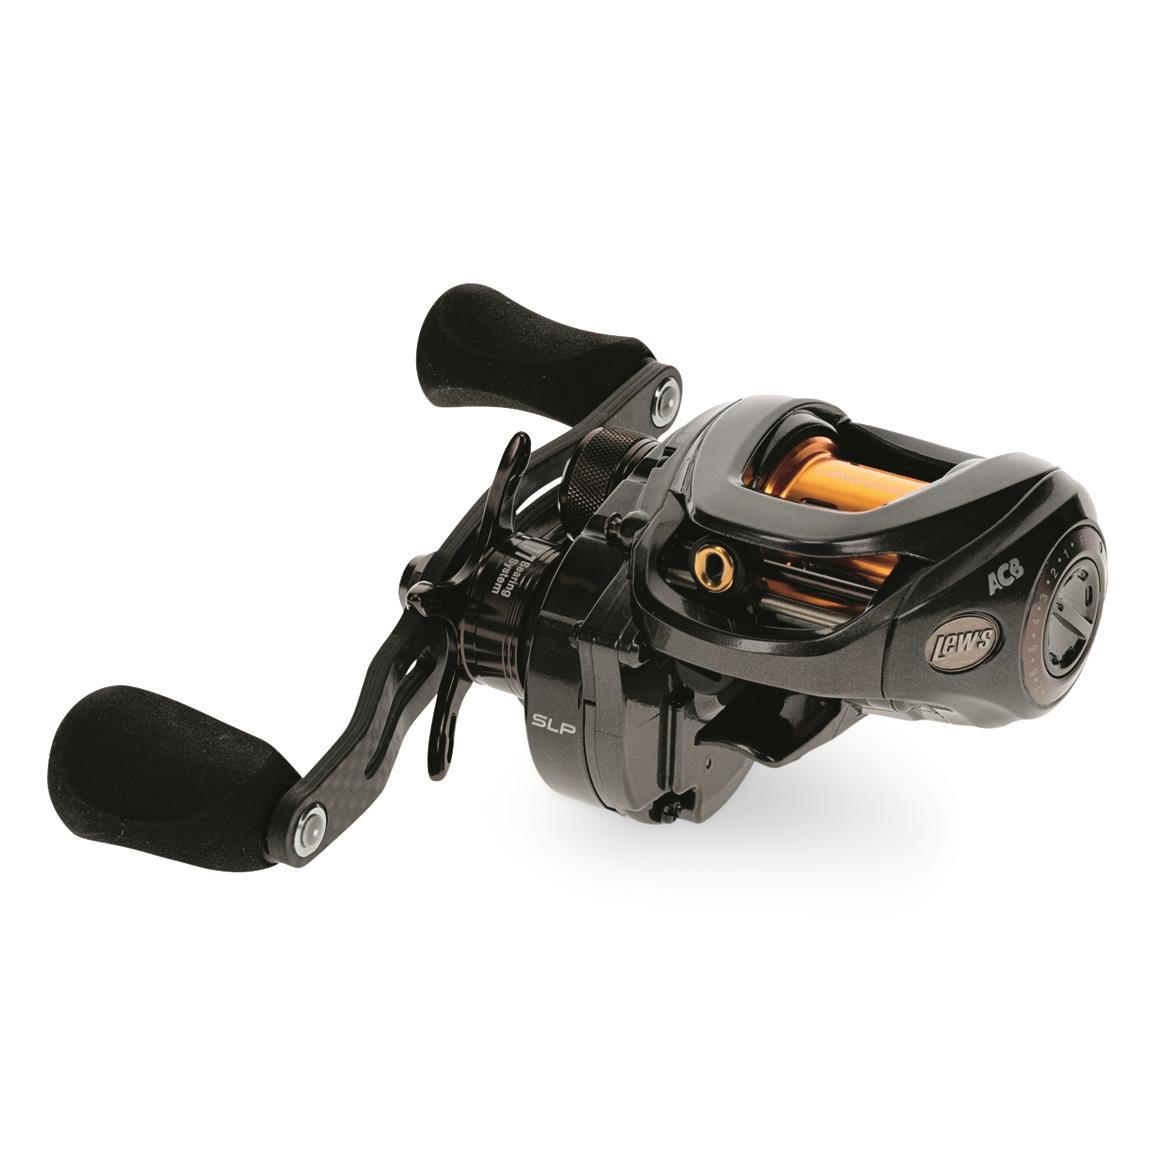 Lew's Speed Spool LFS Baitcasting Reel, 8.3:1 Gear Ratio, Right Hand -  732897, Baitcasting Reels at Sportsman's Guide